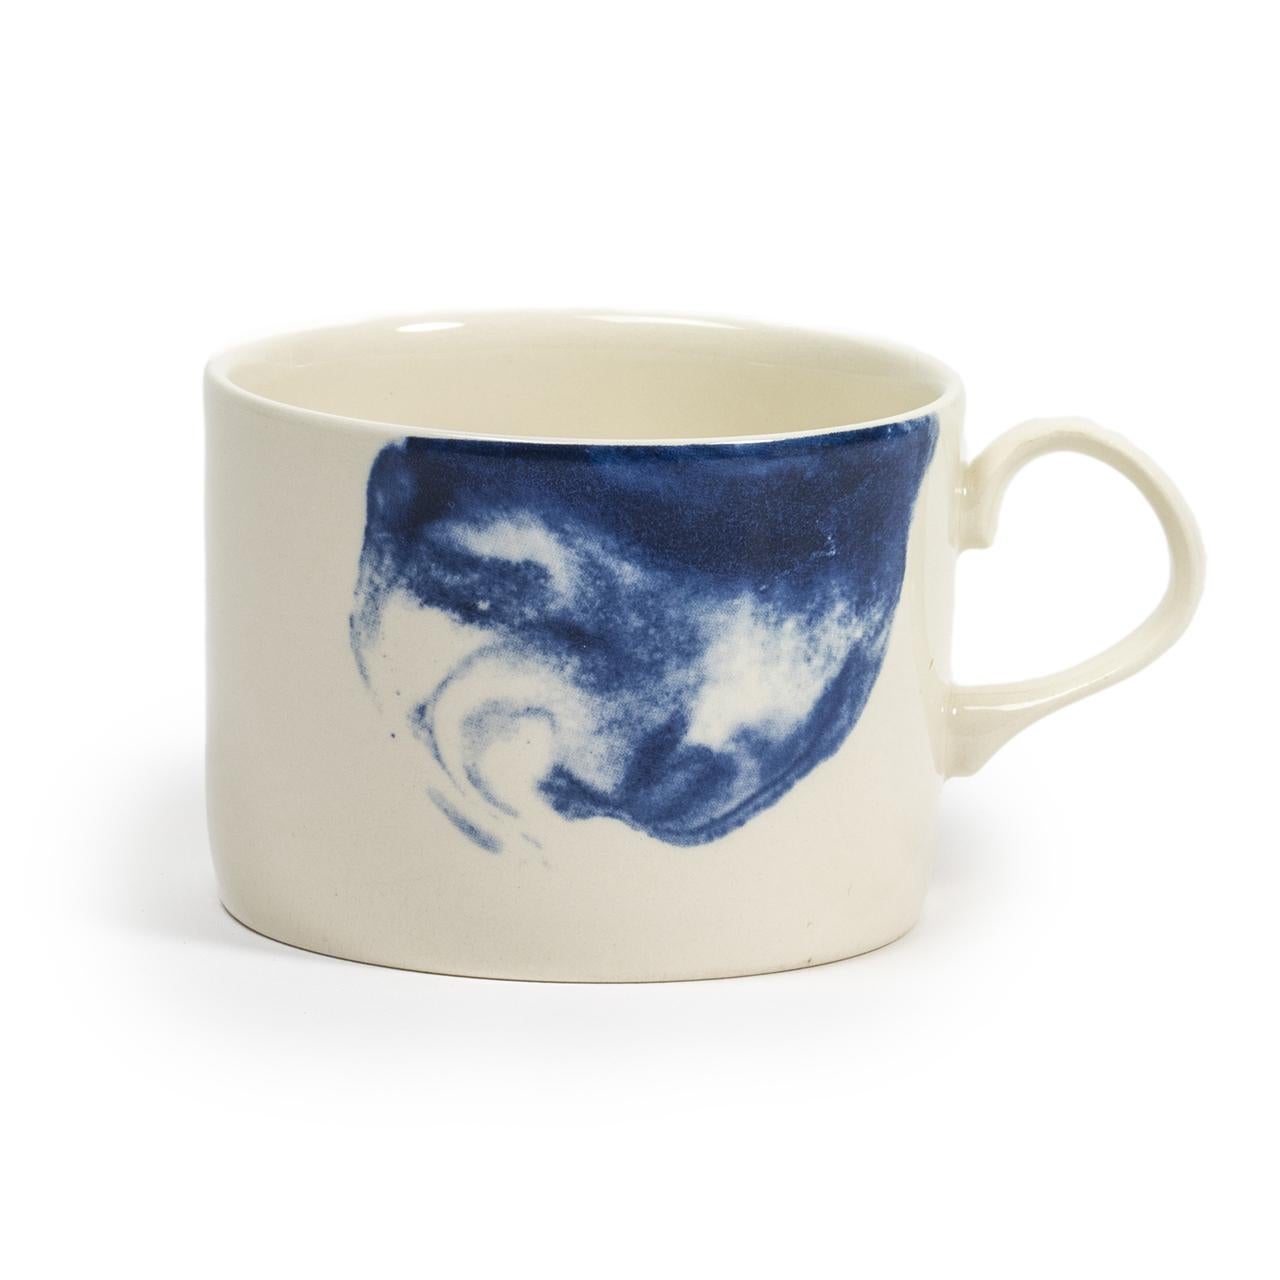 Modern Contemporary Earthenware Mug with Interpretation of Traditional Creamware Forms For Sale